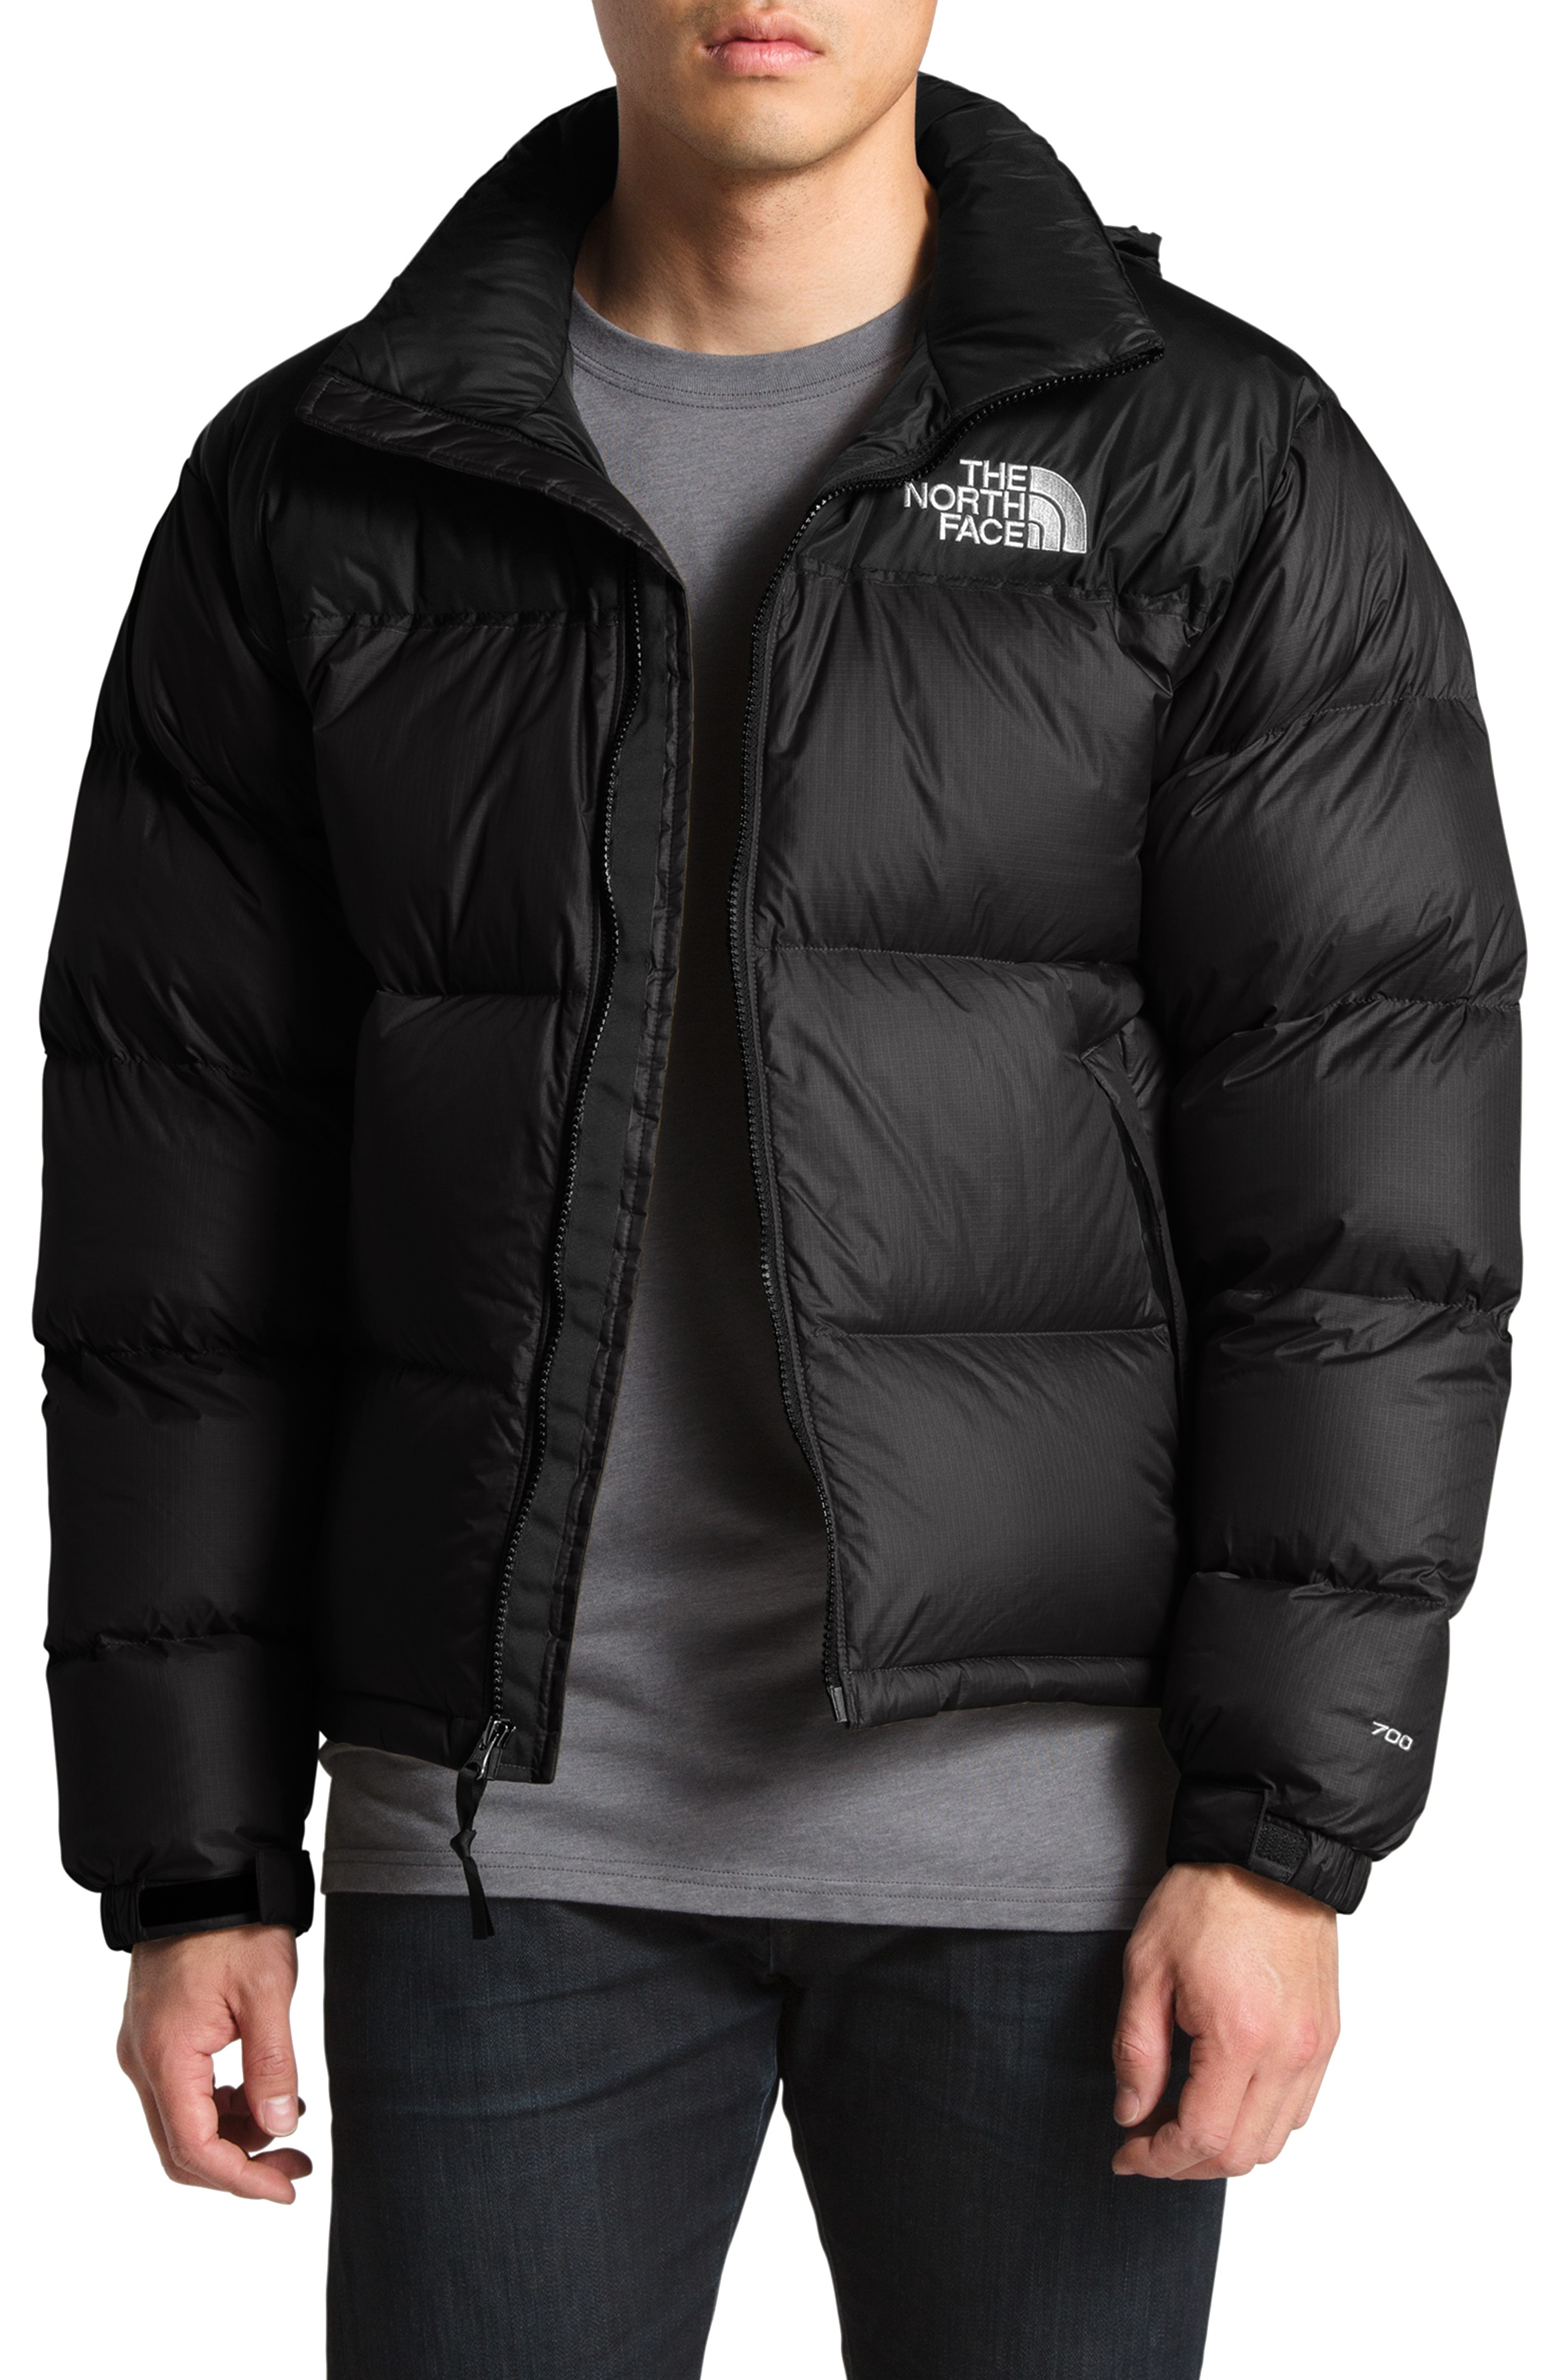 Black Down Jackets- sporty jackets with style